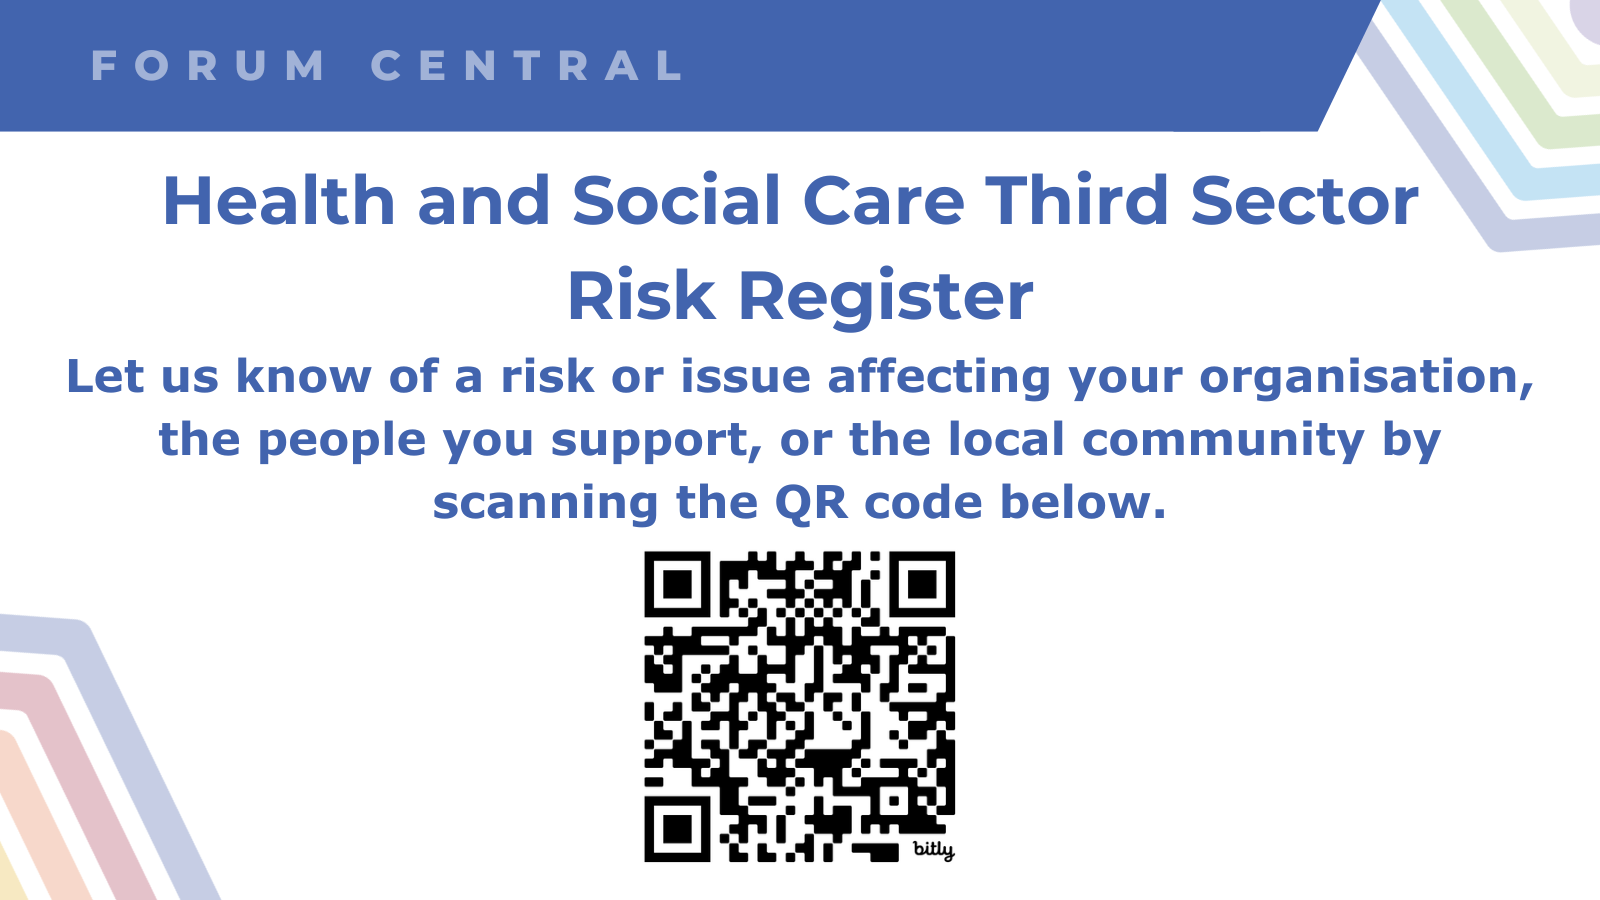 Poster for the risk register. All the info is included in the post. The QR code in the poster is a link to the form linked in the post.